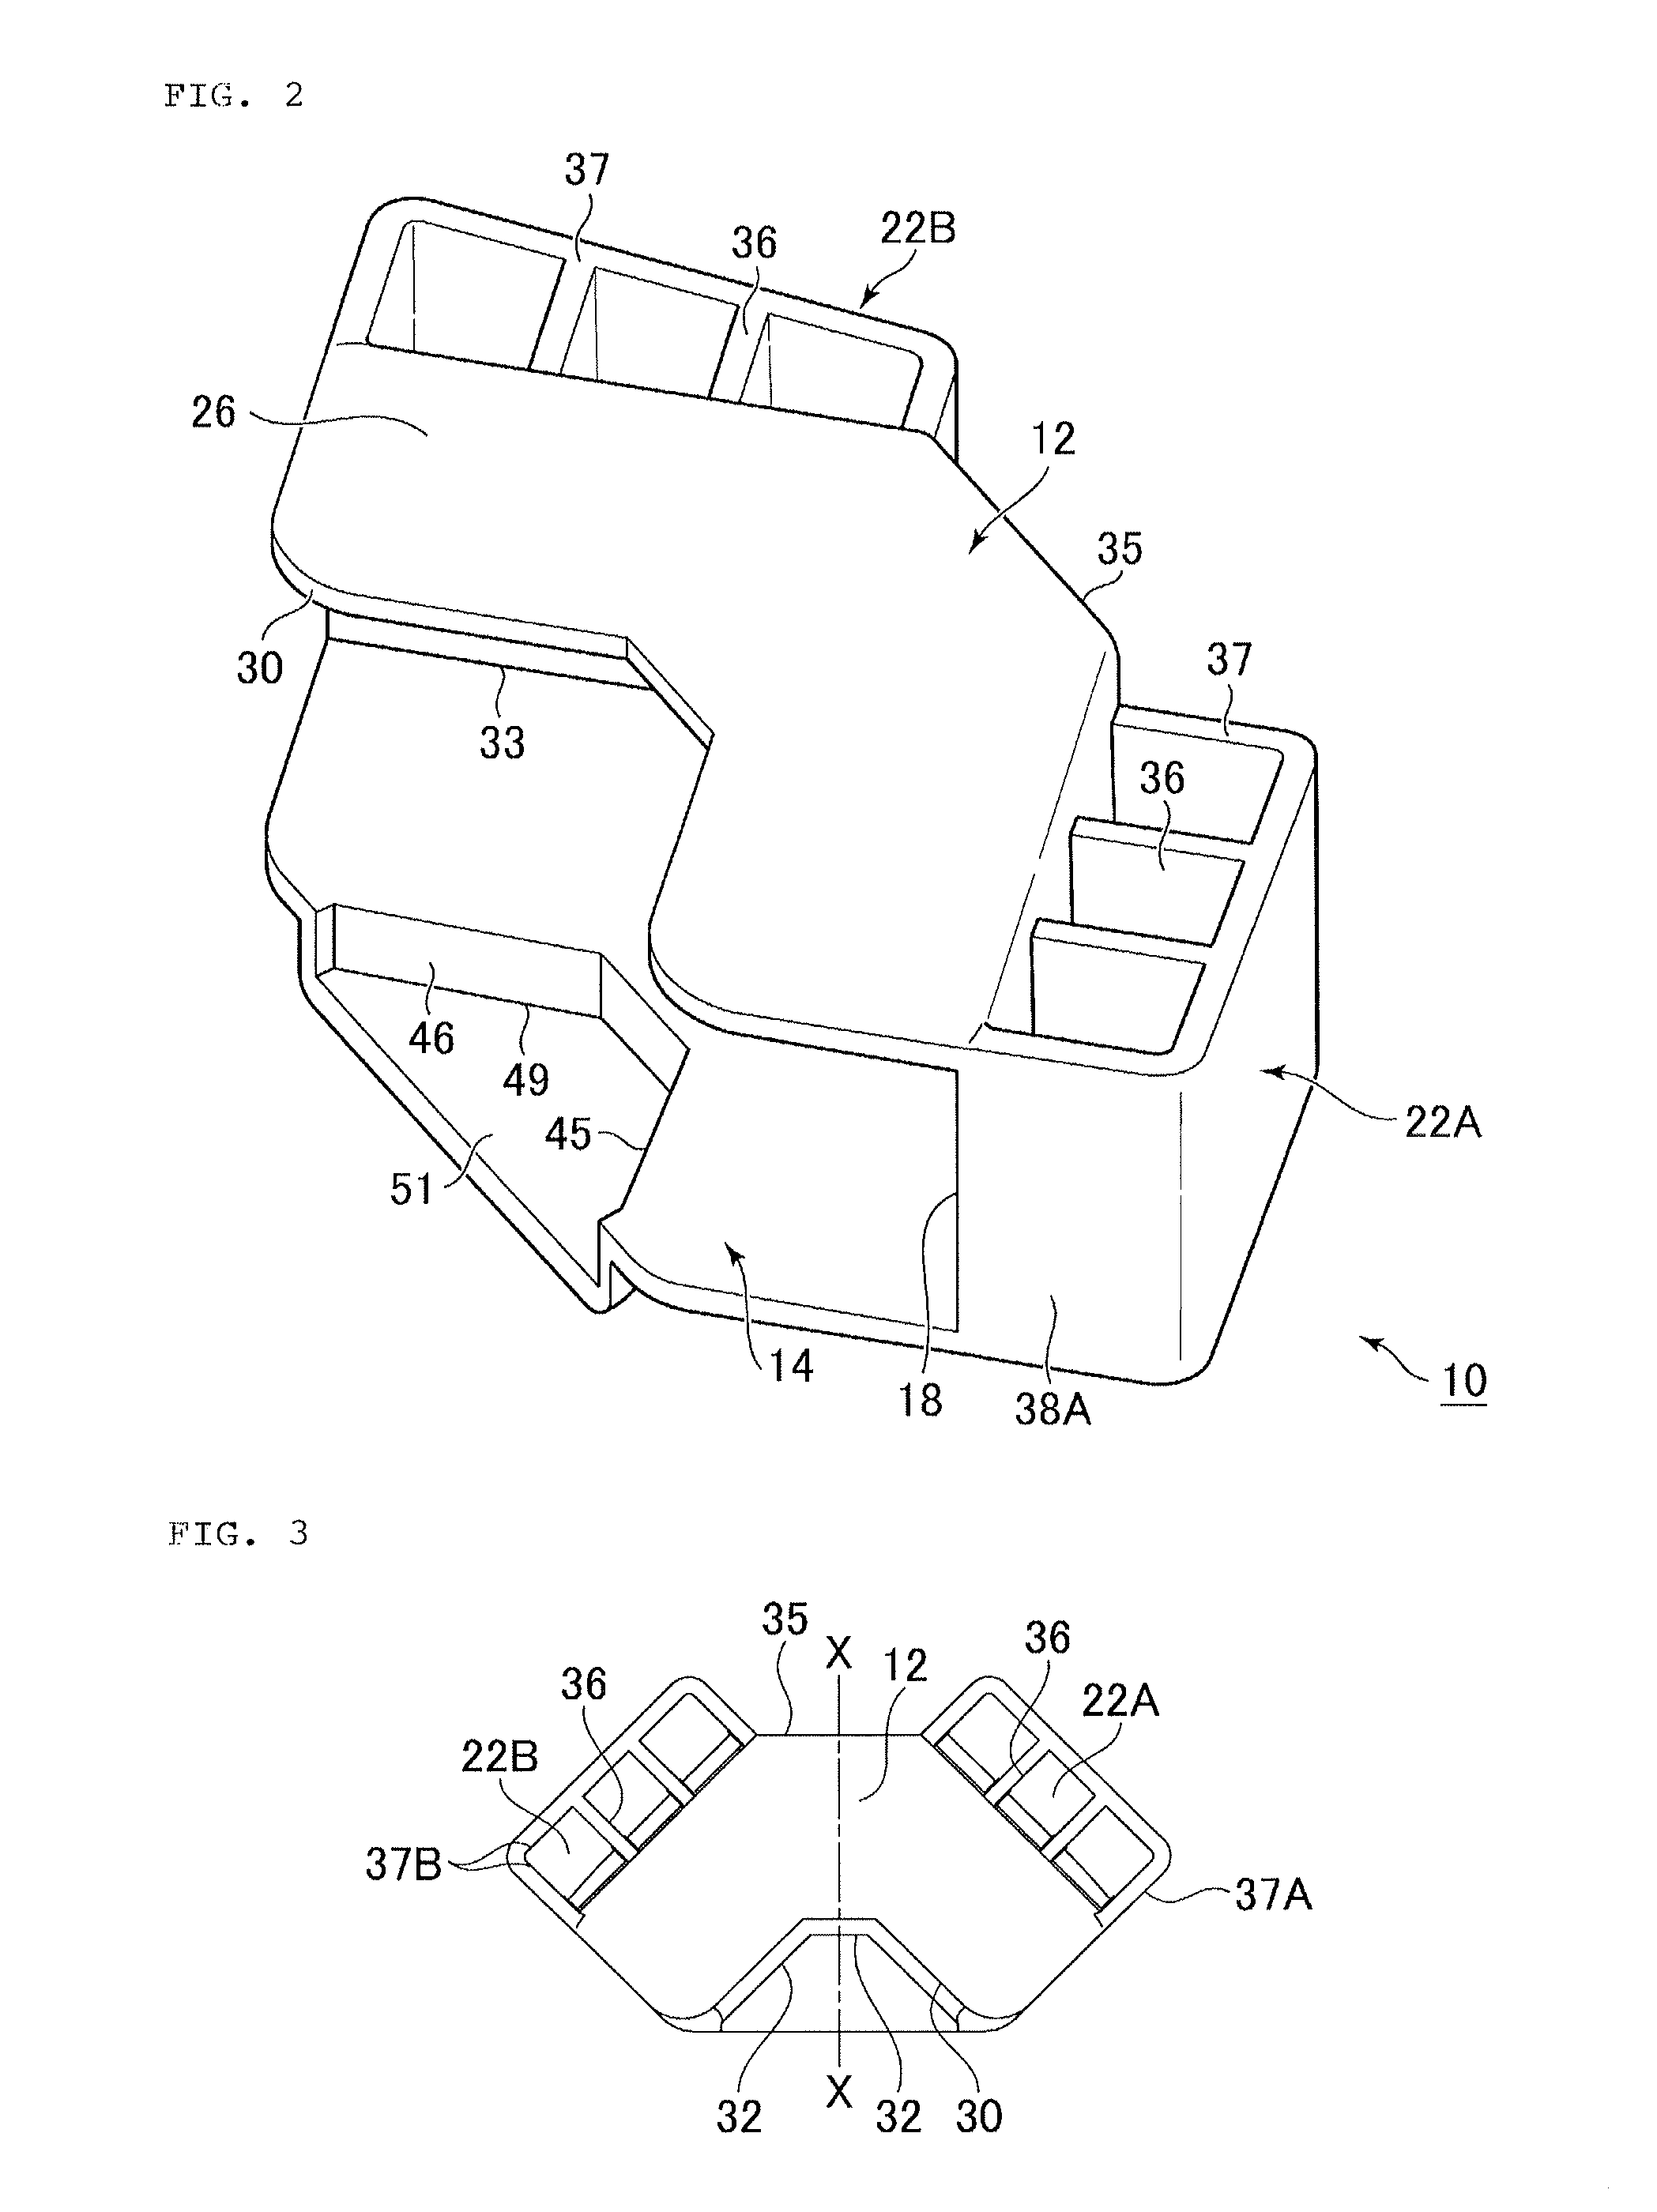 Module used for stacking thin plate panels